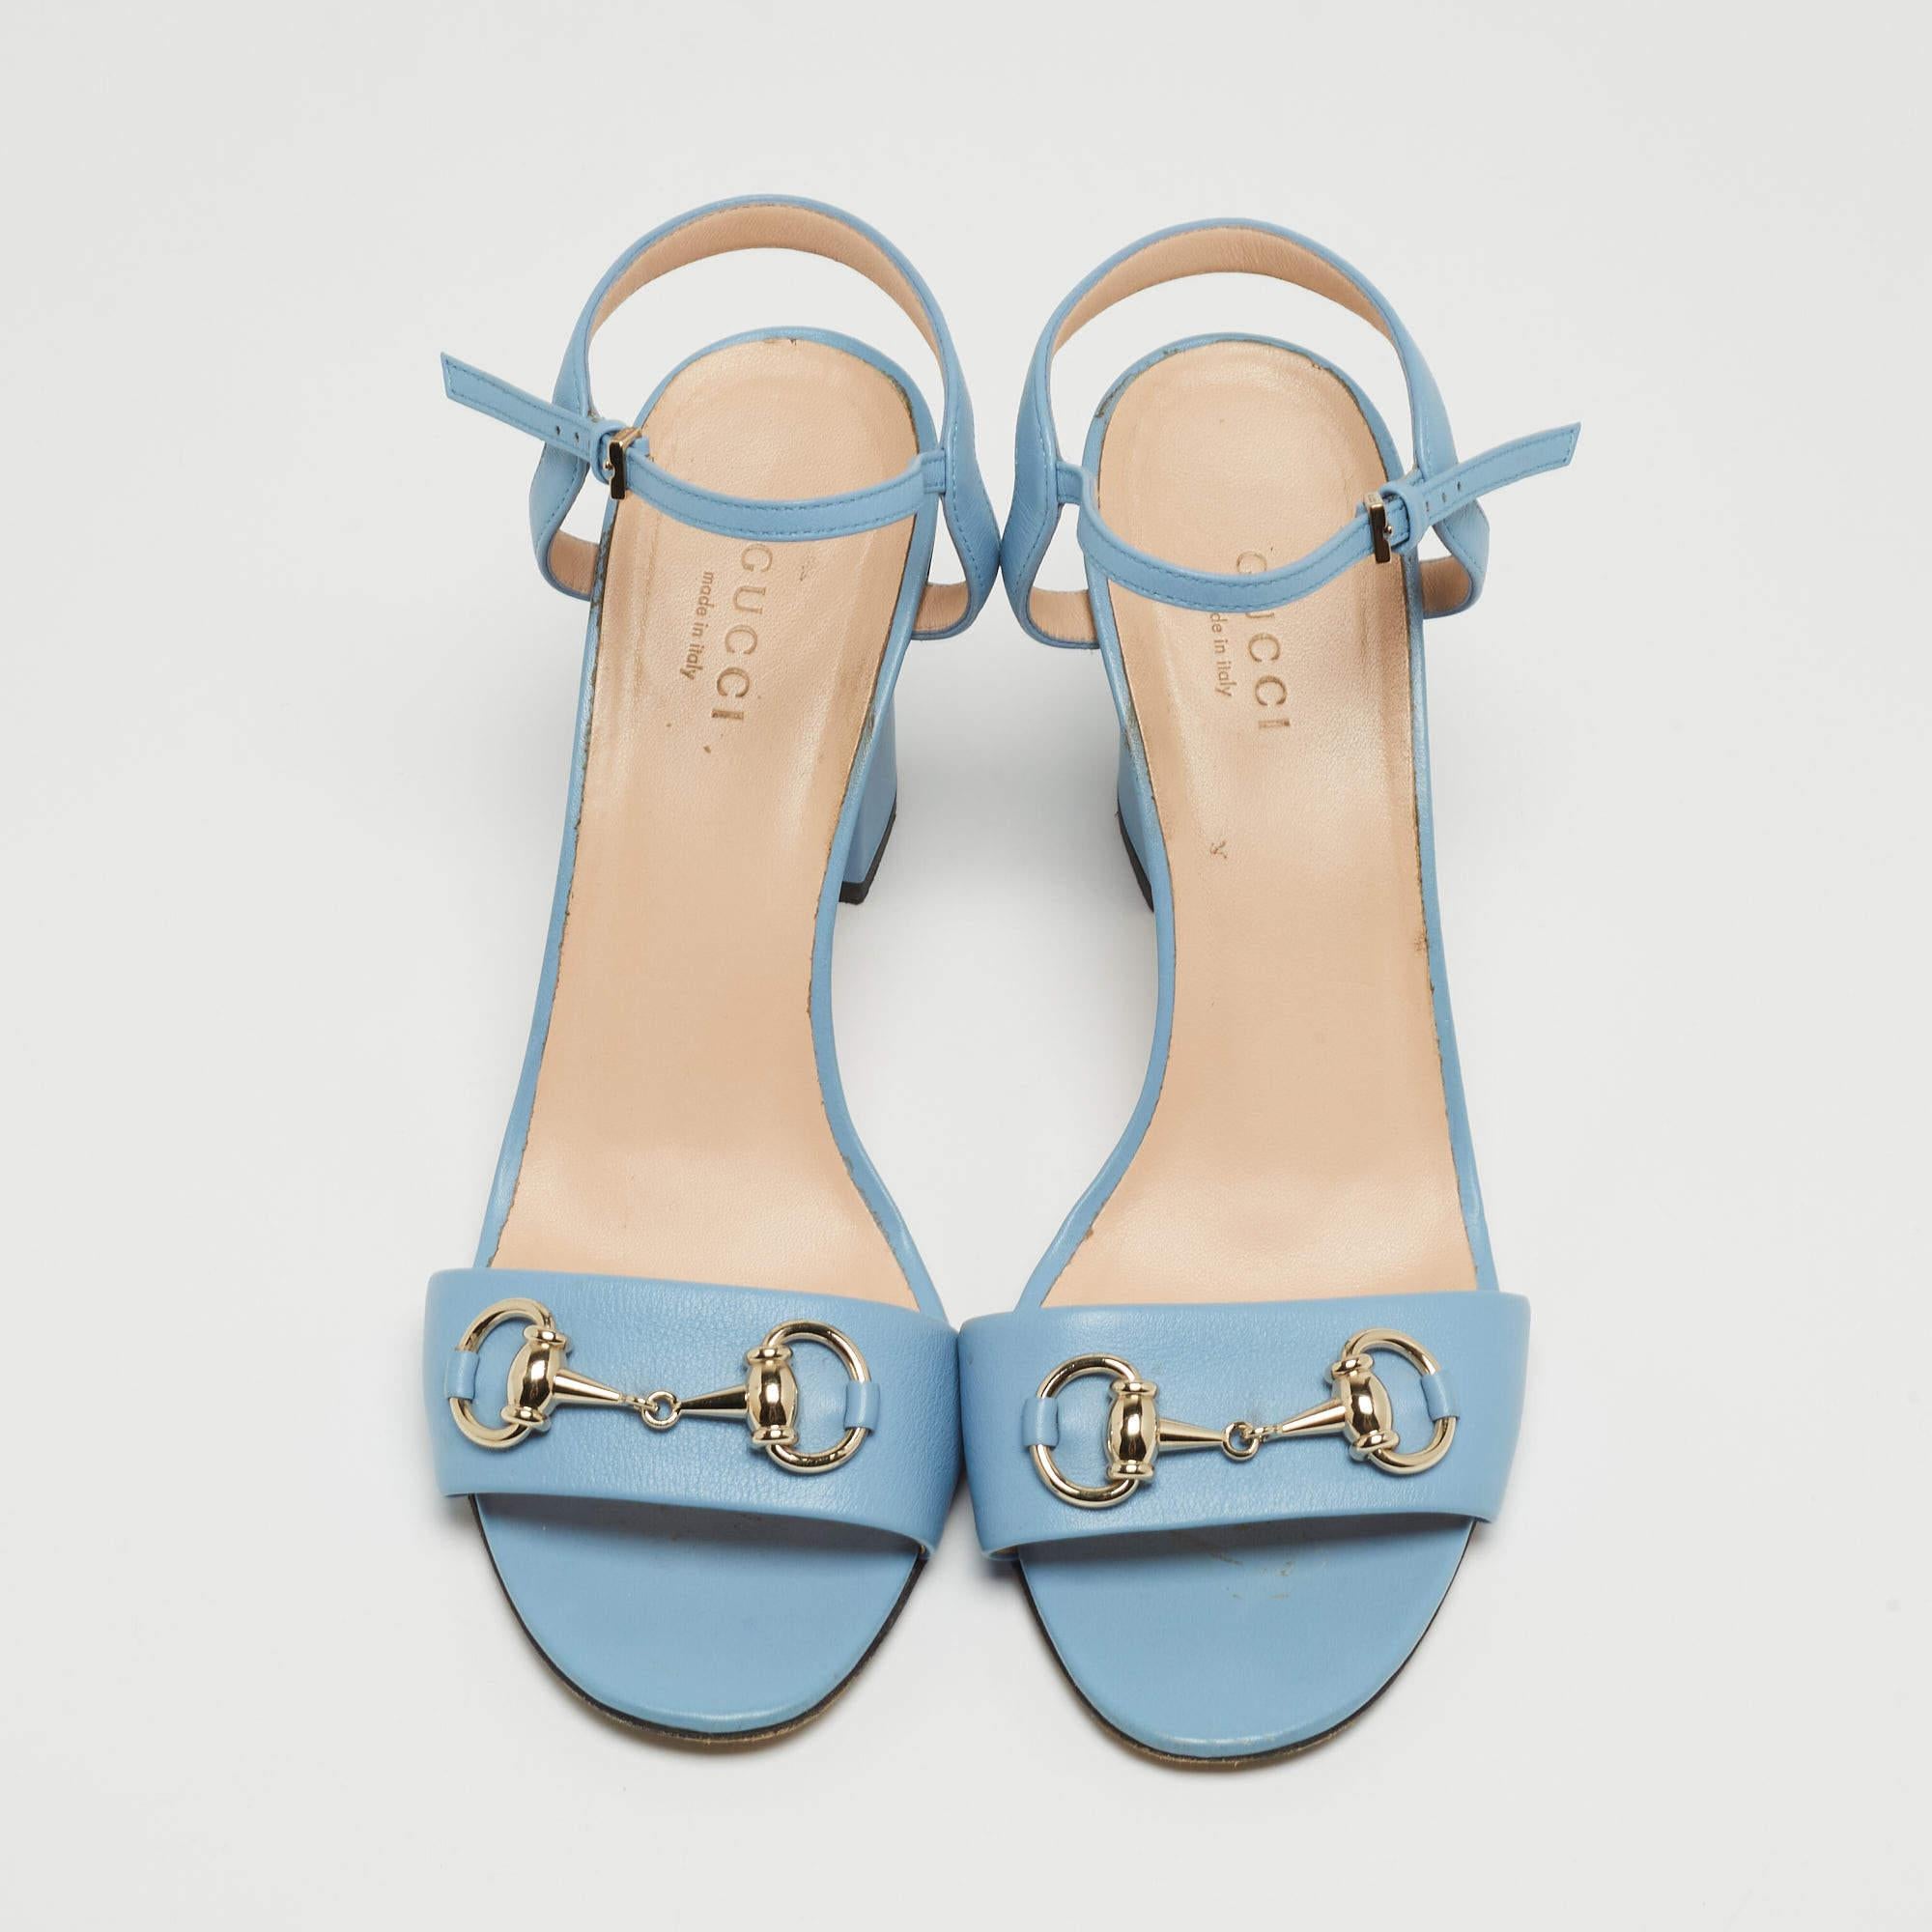 Crafted with supple blue leather, they feature the iconic horsebit detail on the front, a slender ankle strap for support, and a block heel. These Gucci sandals exude elegance and sophistication, making them a perfect choice for any stylish